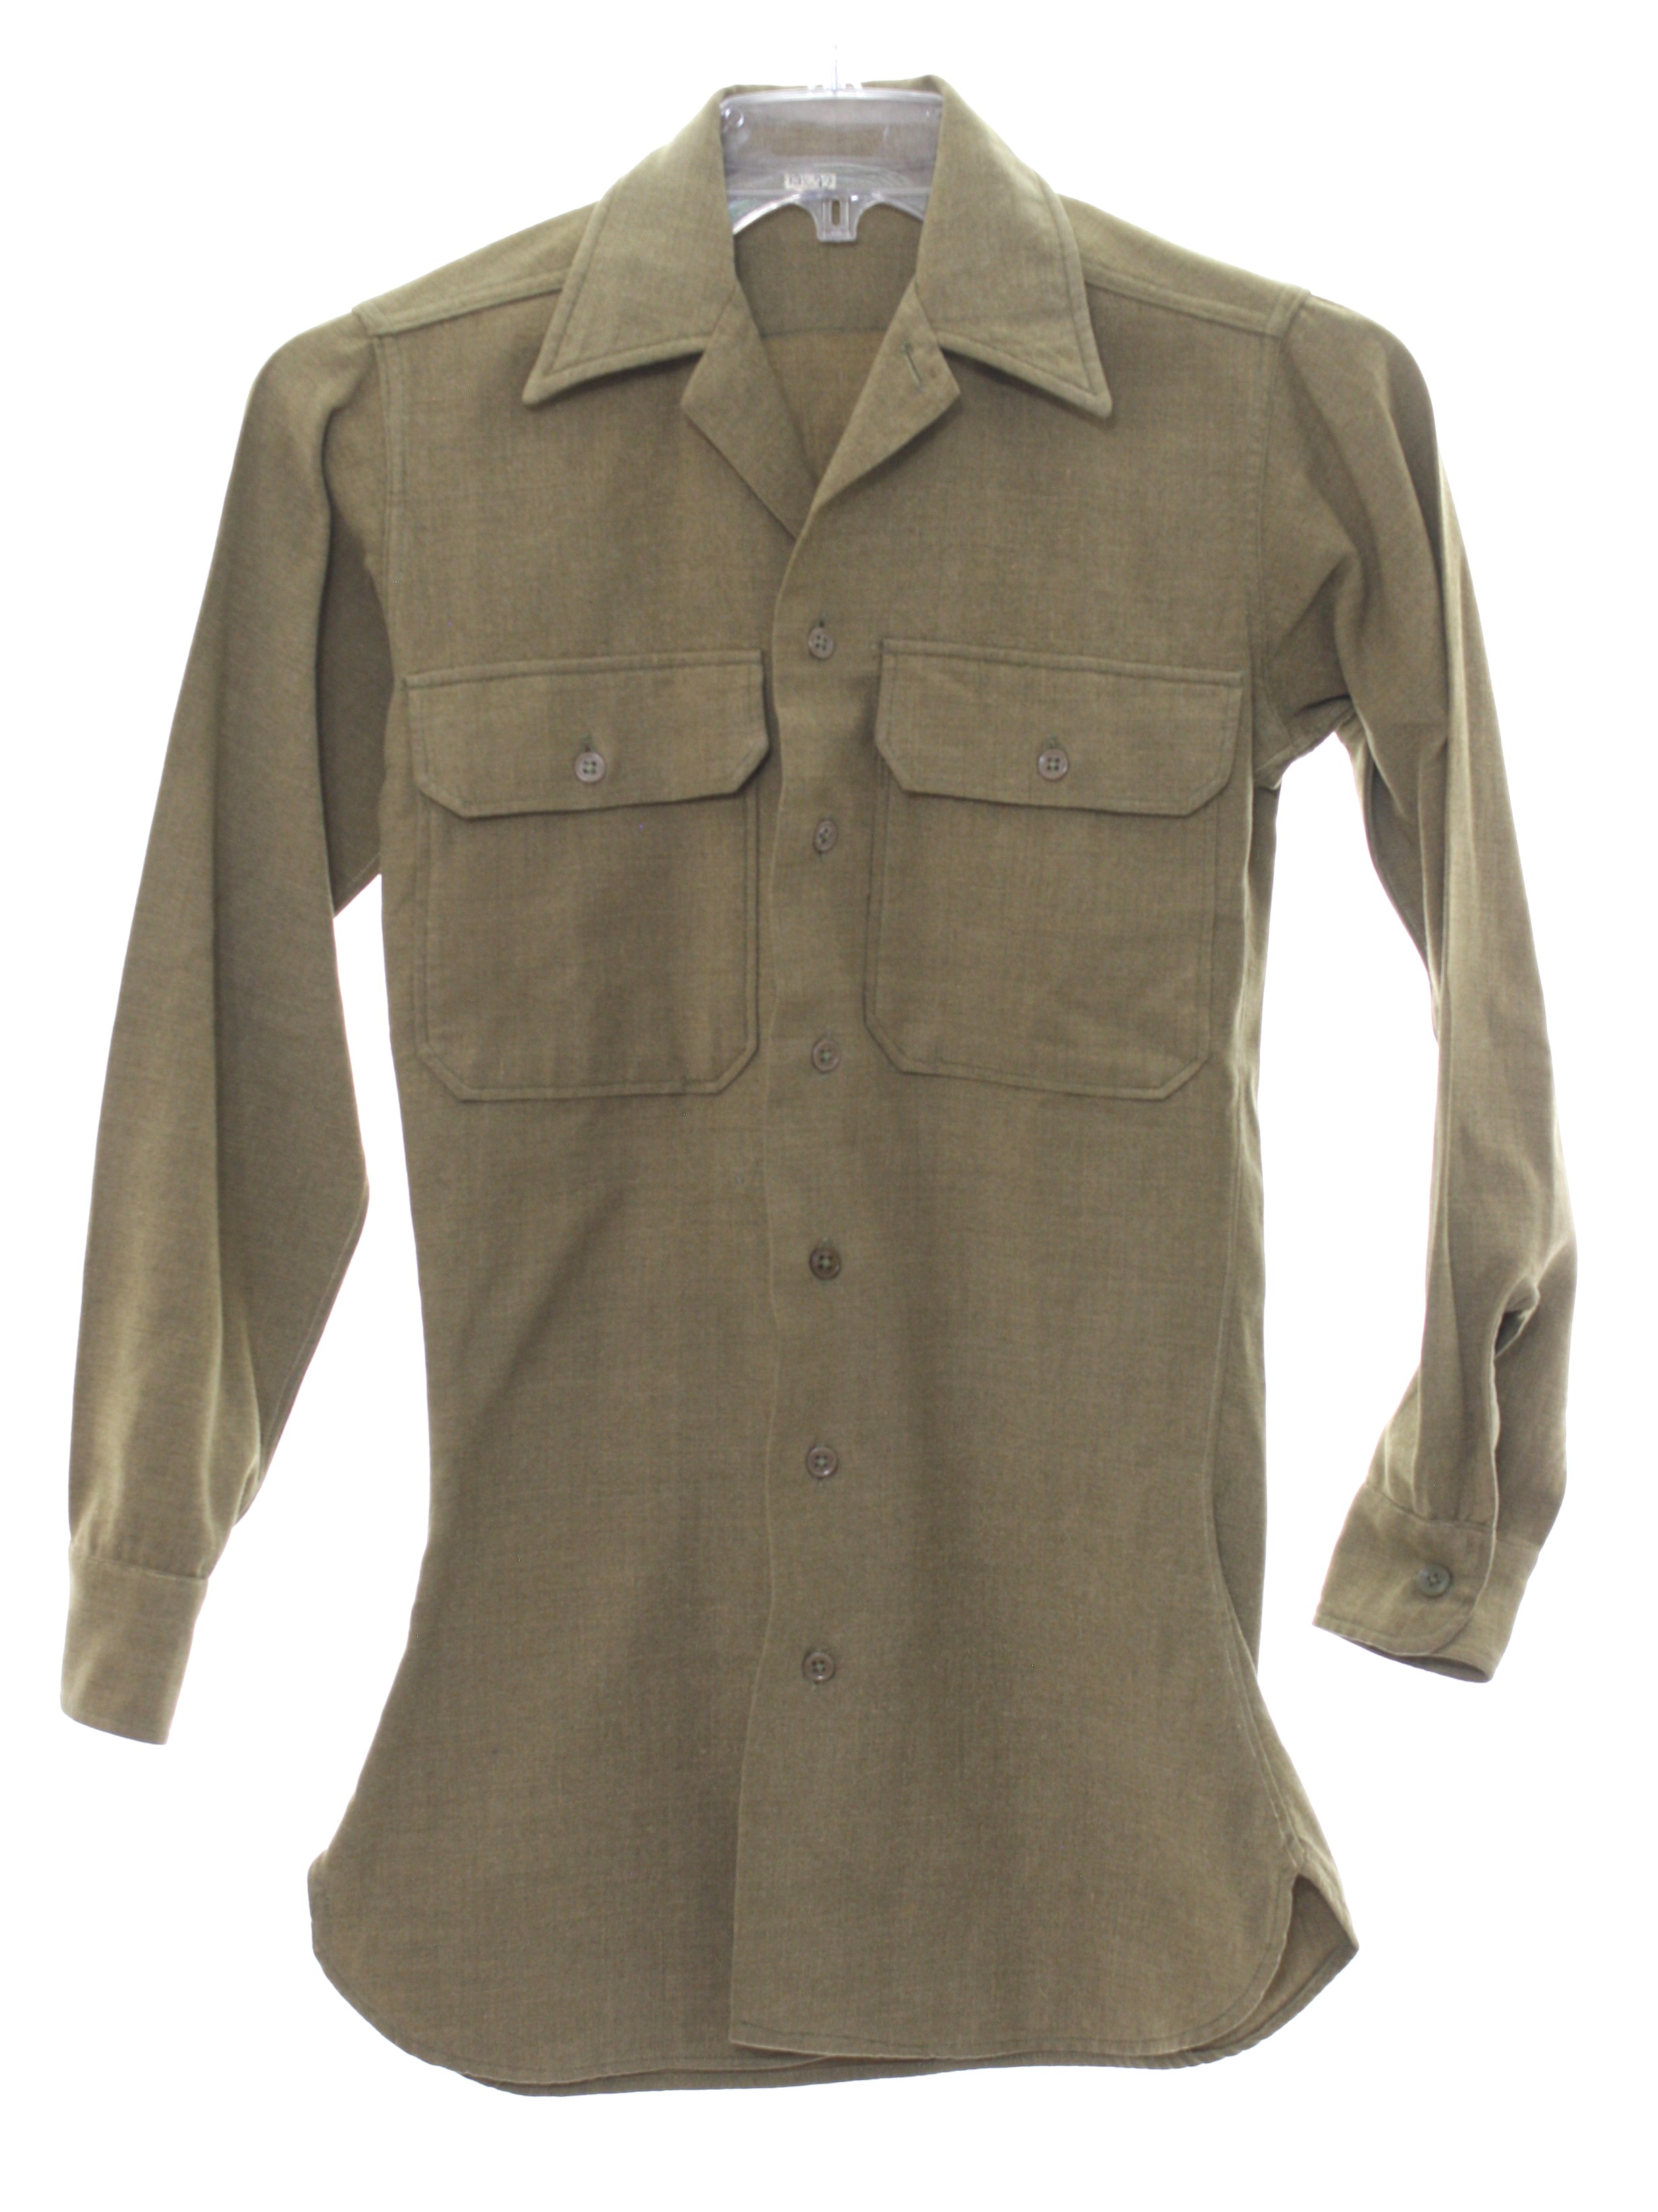 1940's Retro Shirt: Early 40s -No Label- Mens light olive green wool ...